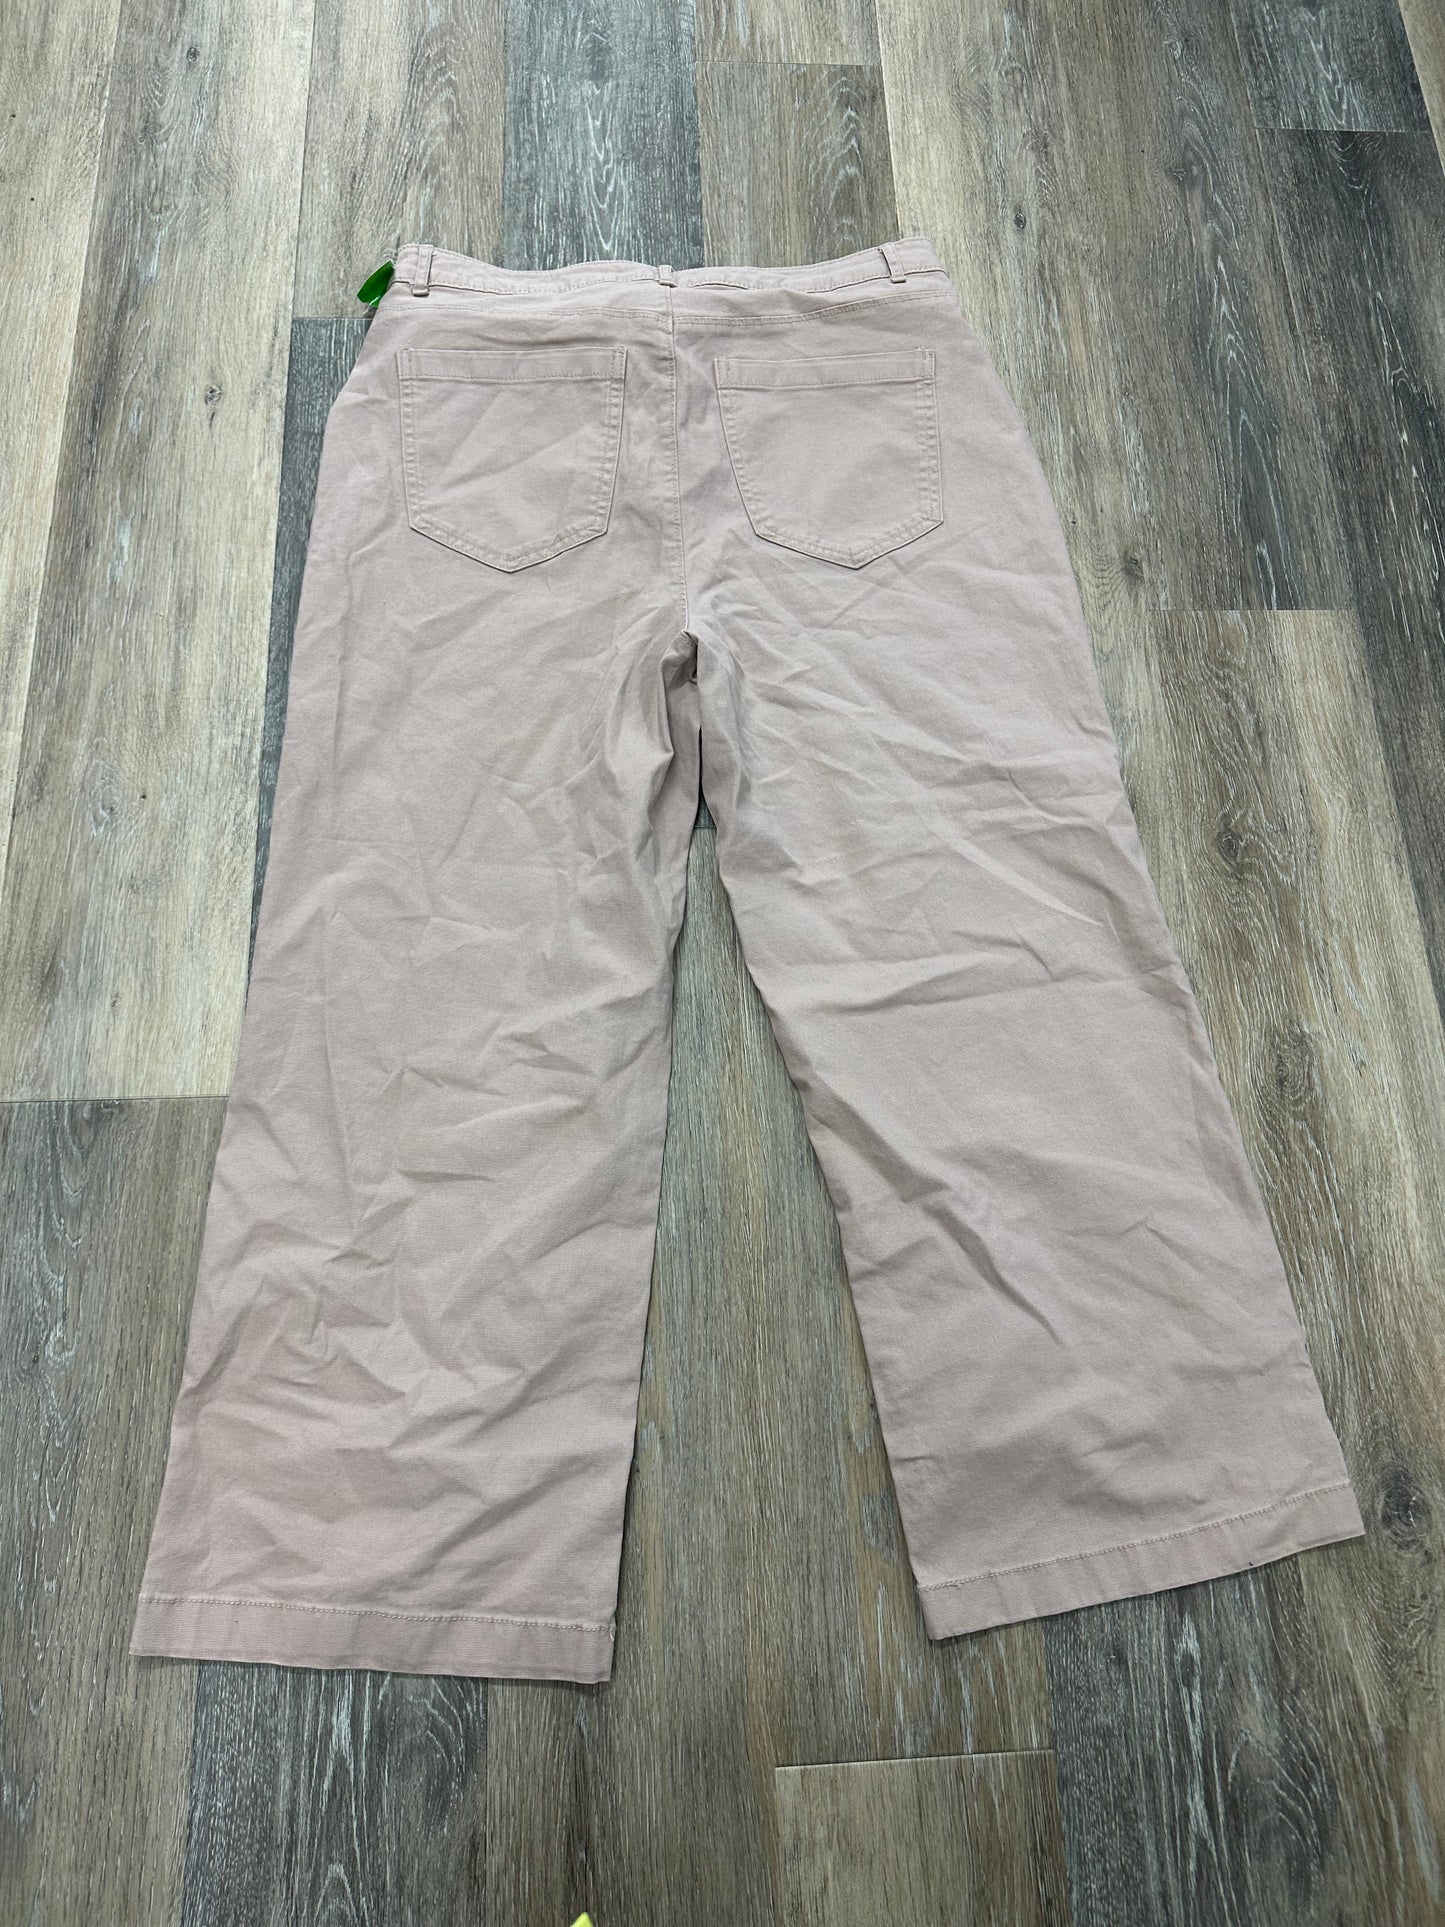 Pants Ankle By Old Navy  Size: 14